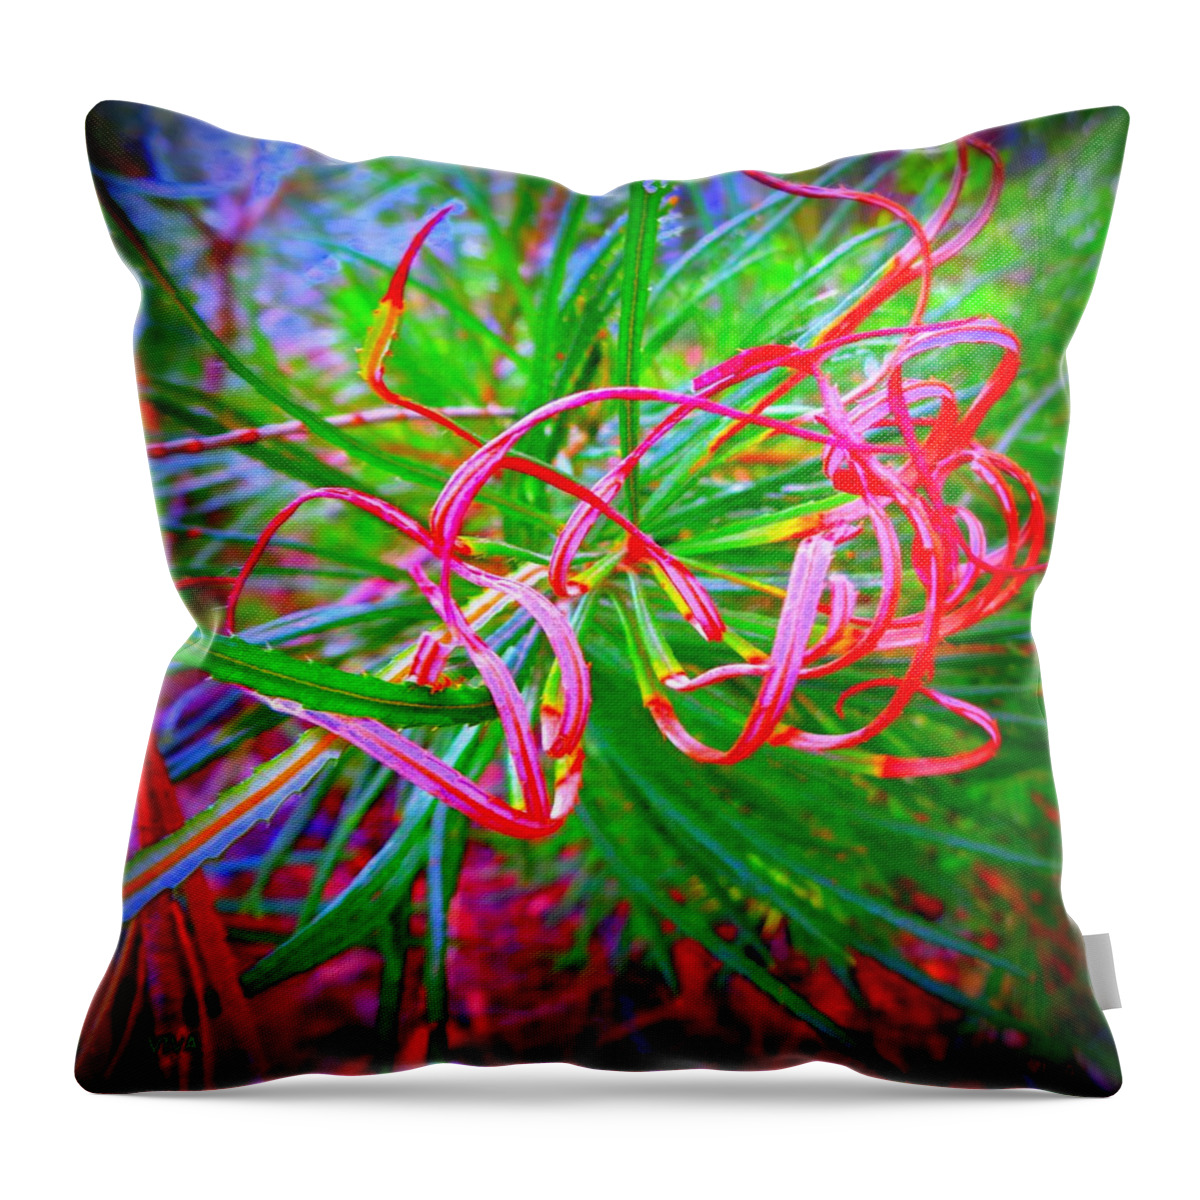 Tendril Throw Pillow featuring the photograph Nature's Ribbons by VIVA Anderson